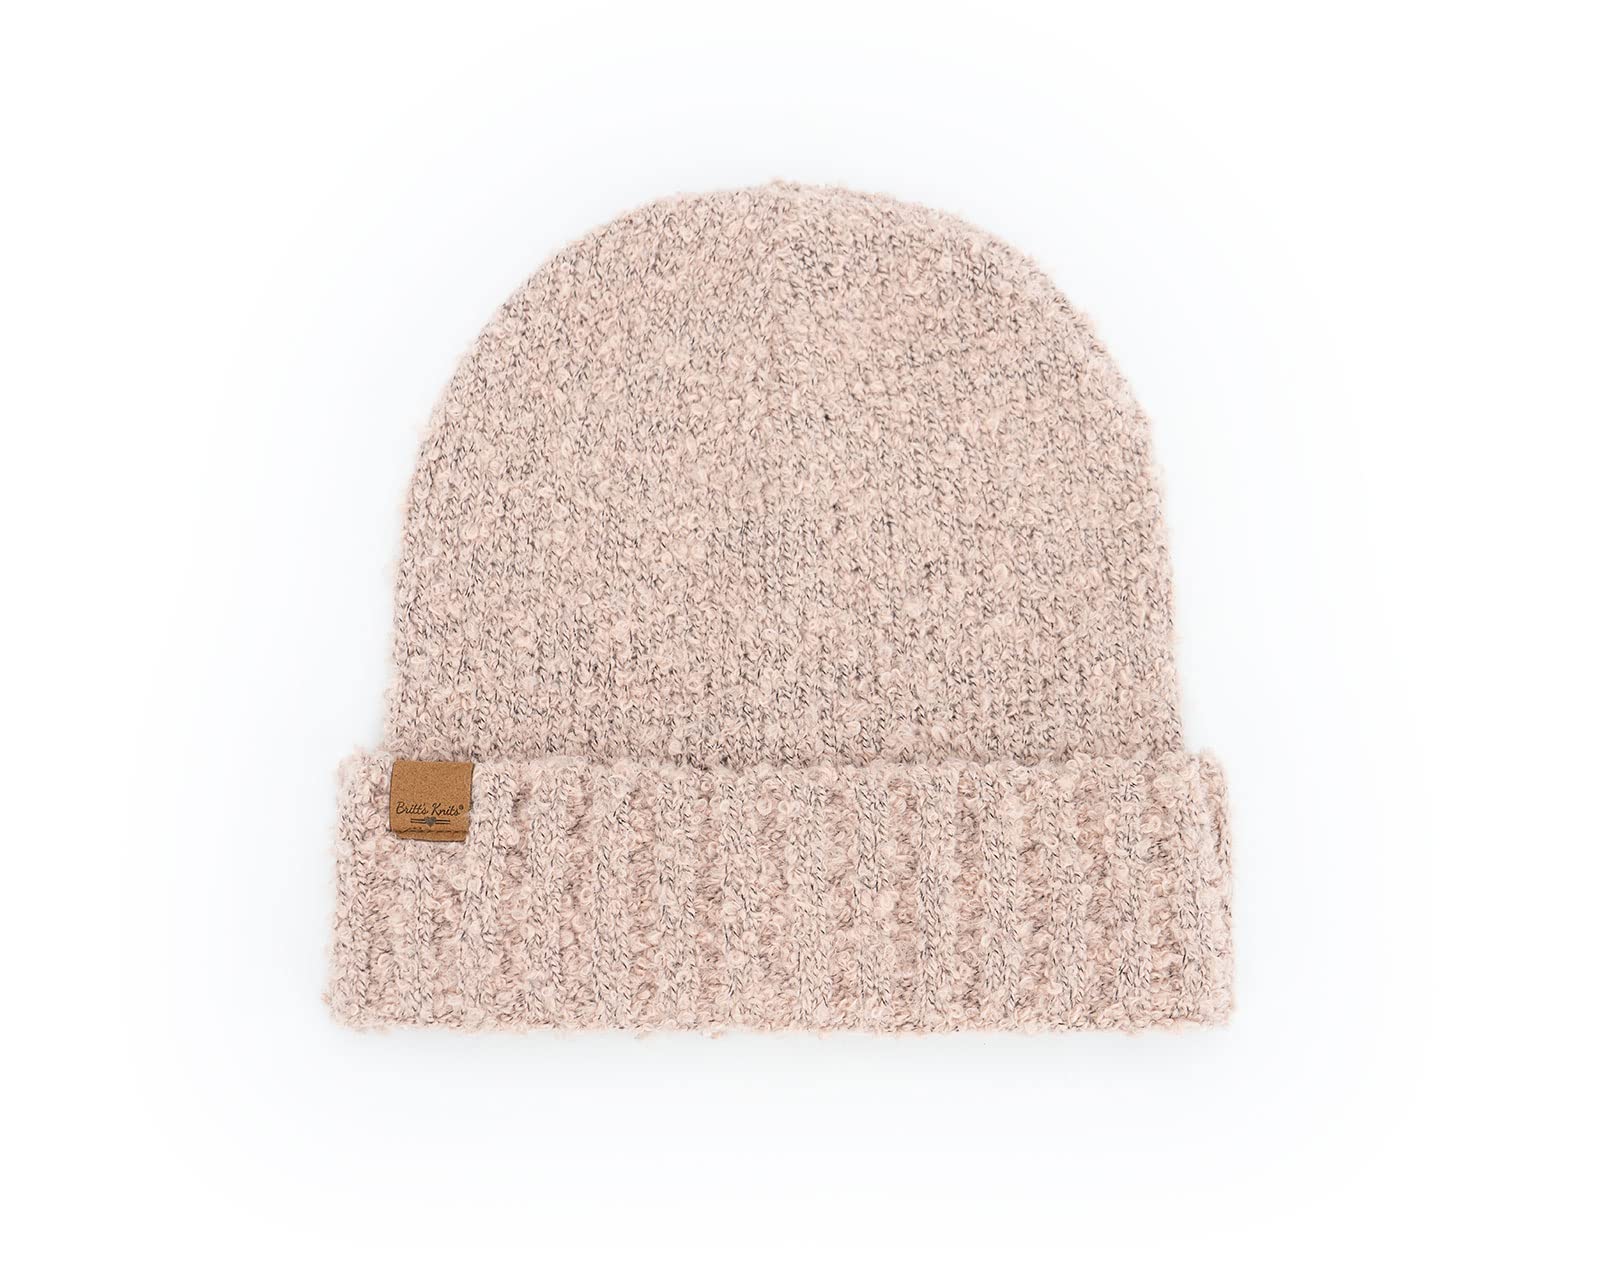 Britt's Knits Common Good Beanie Cold Weather Extra Soft Ecofriendly Knit Hat Classic Cuff Beanie Pink